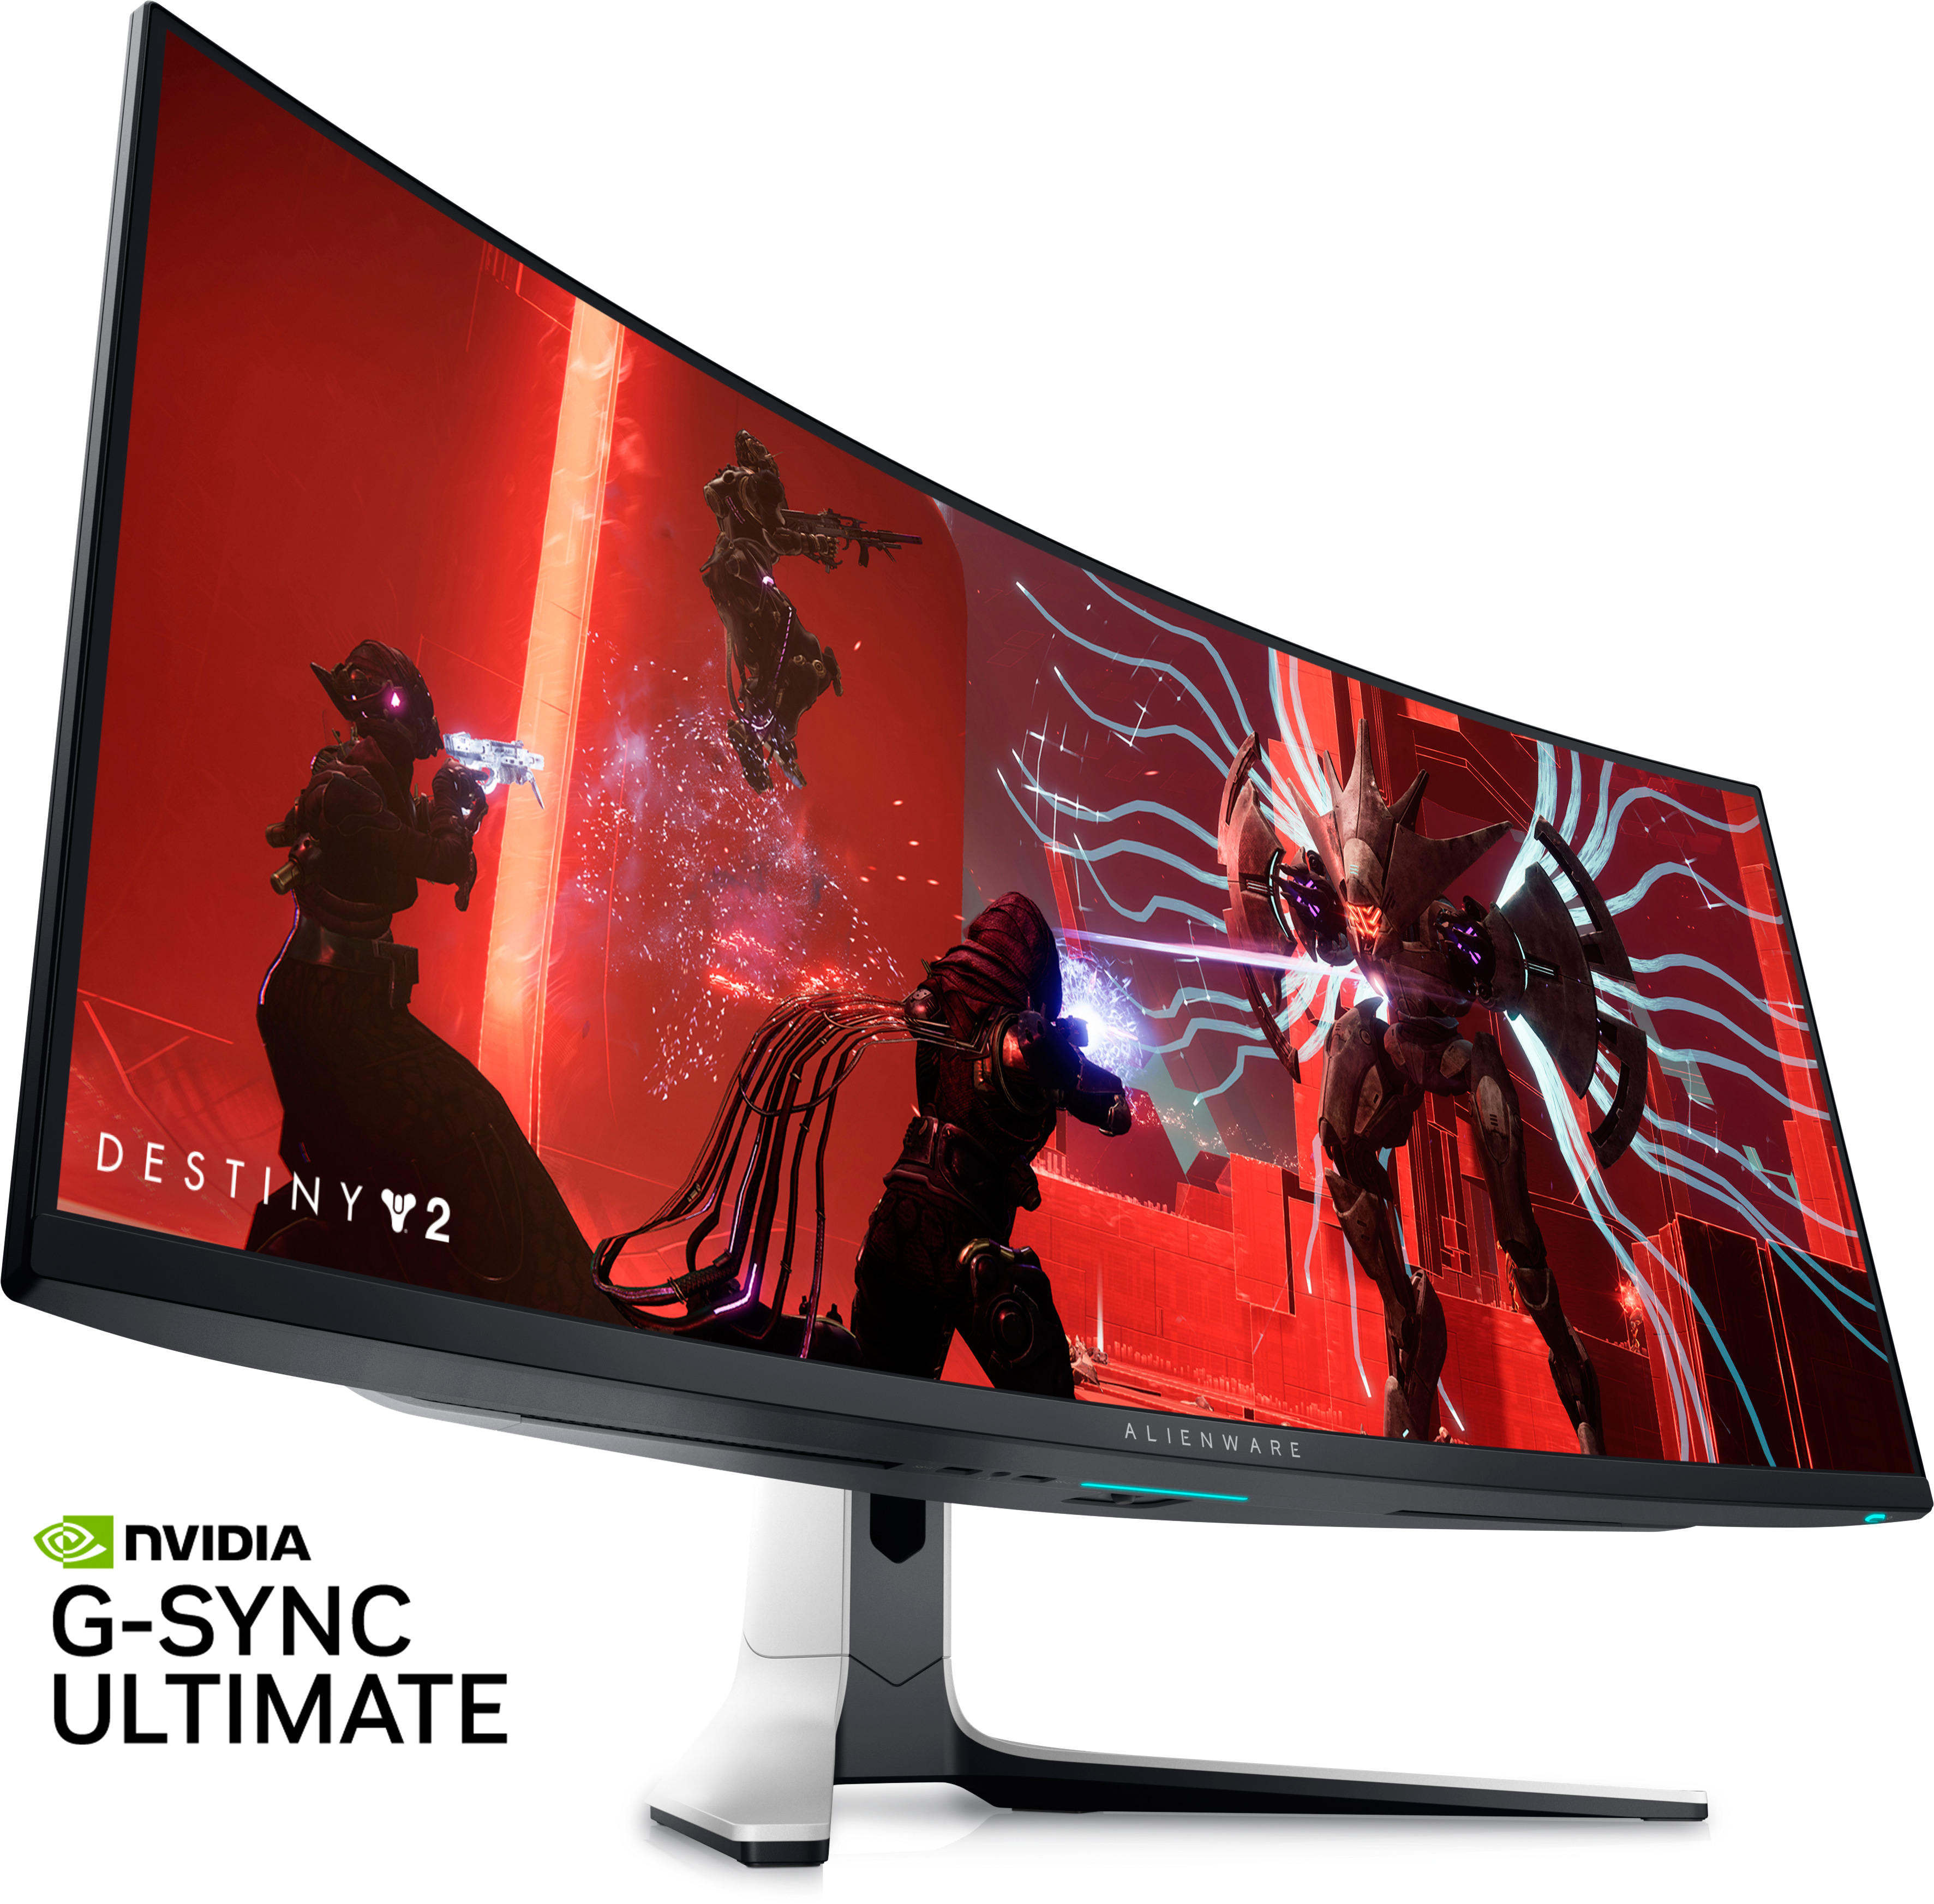 Dell Alienware AW3423DW: The Ultimate Gaming and Movie Monitor